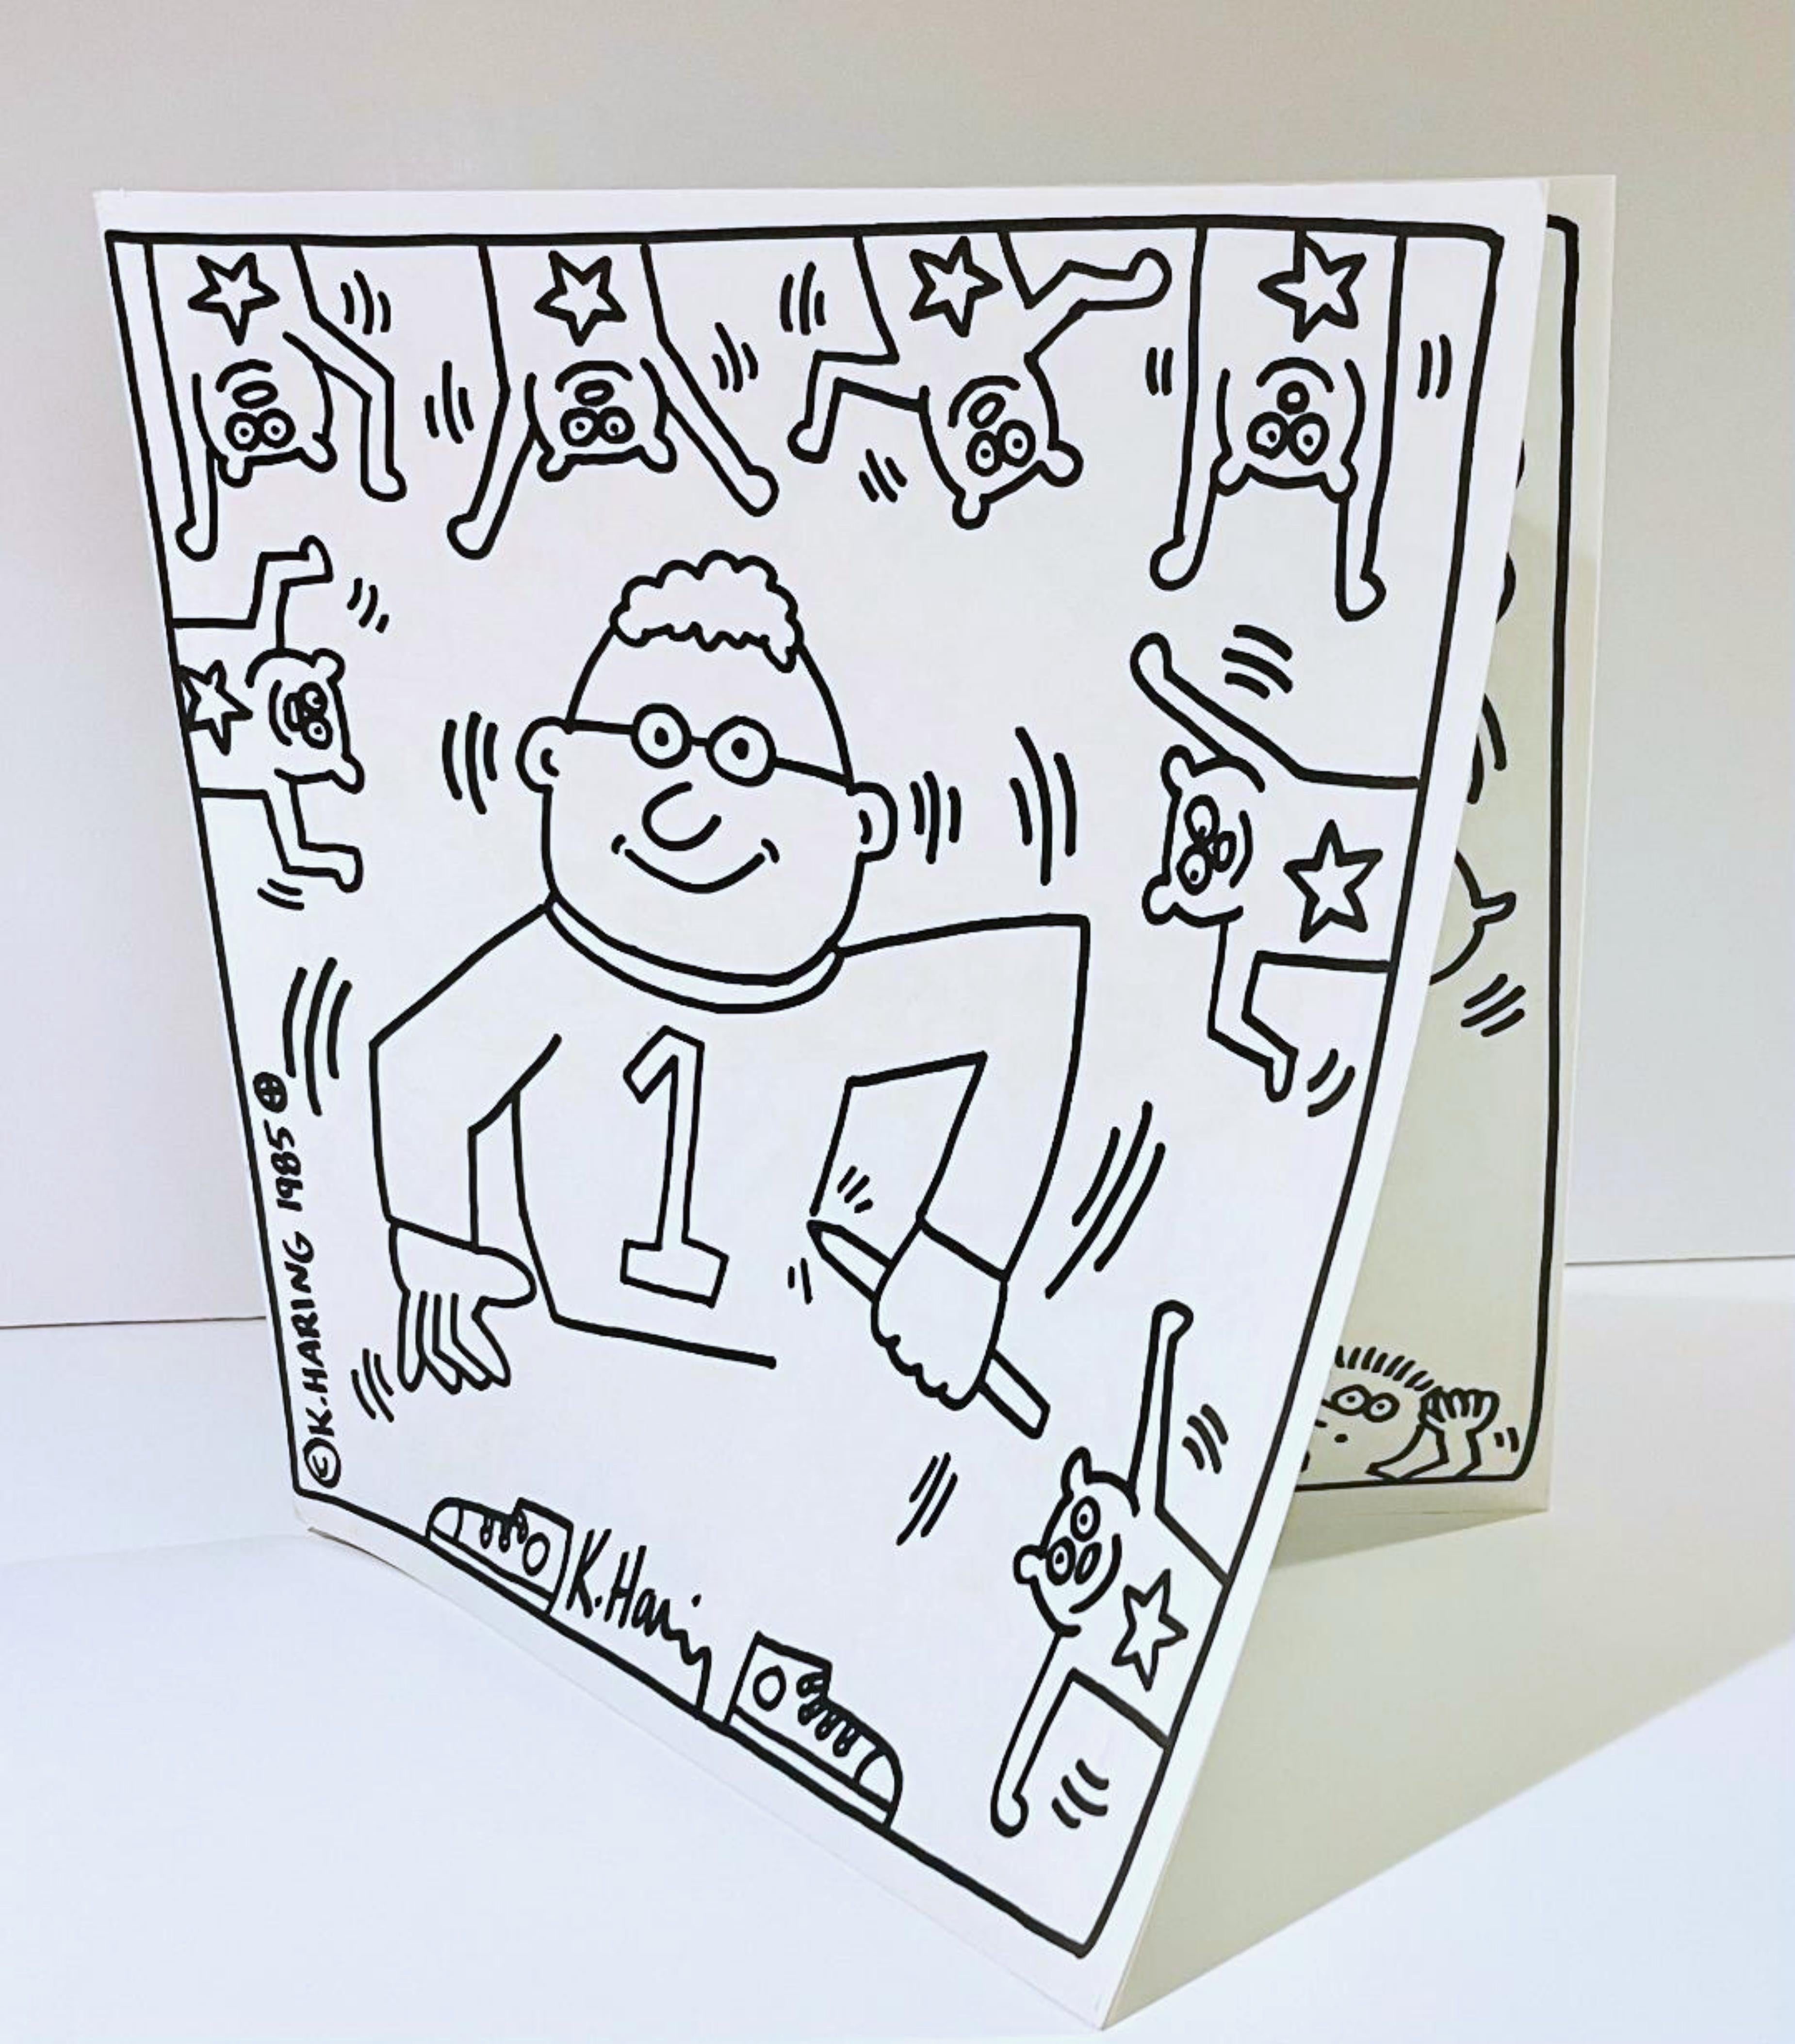 Keith Haring Abstract Print - Limited Edition Coloring Book (Artist Book of 20 Bound Offset Lithographs), 1985